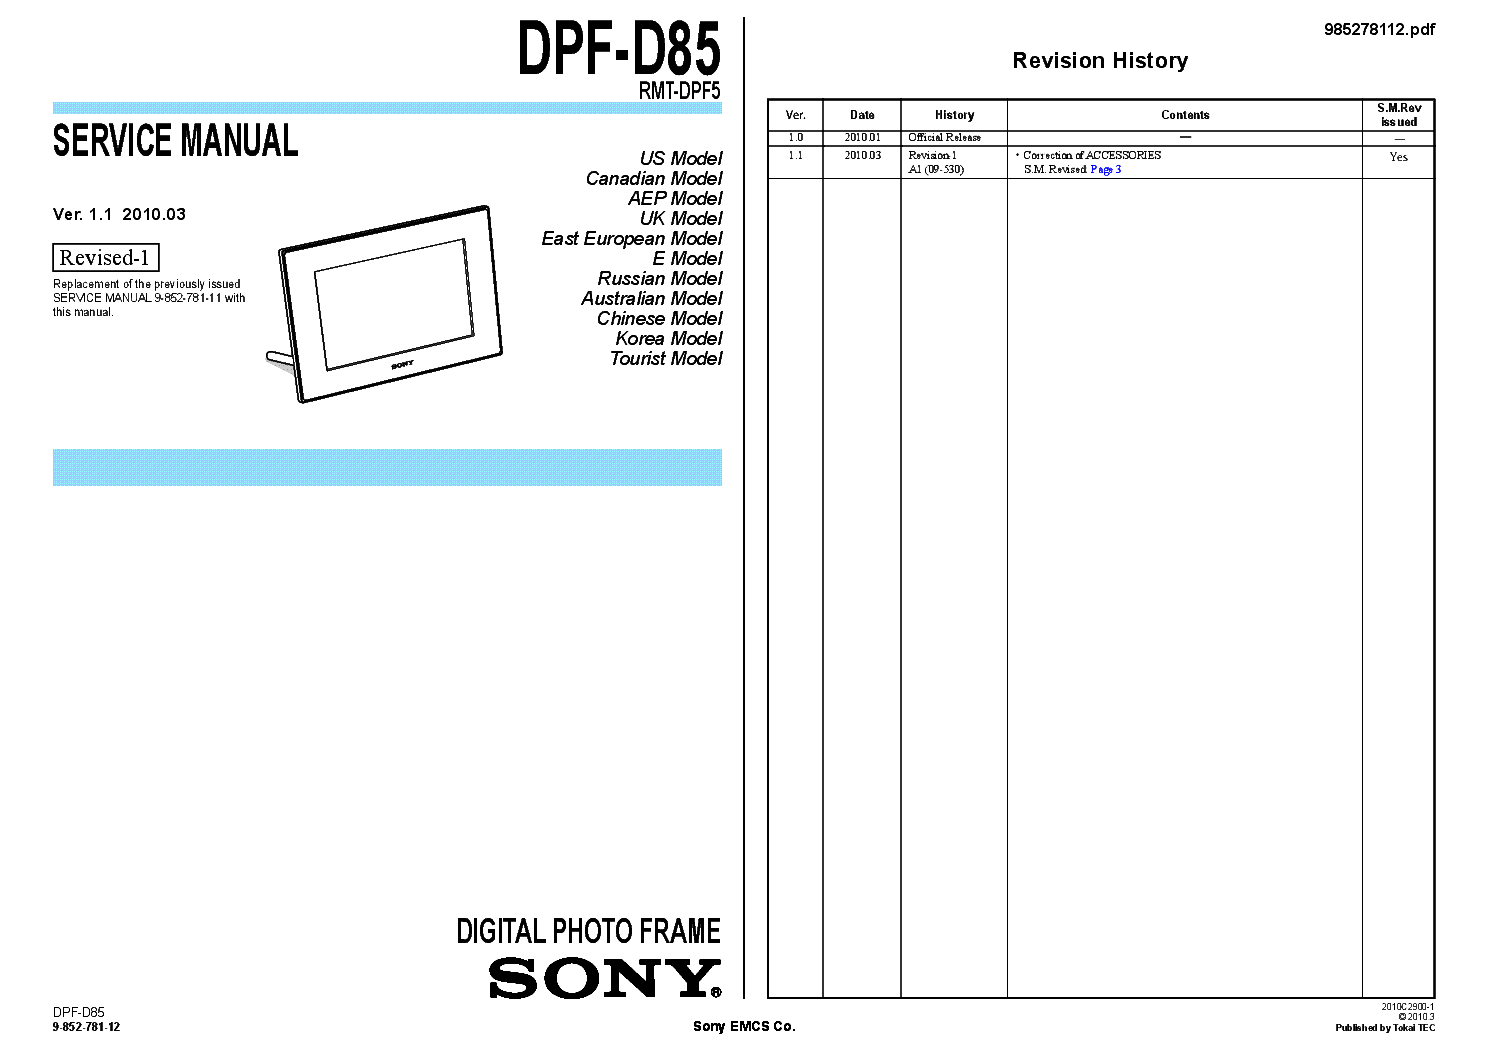 SONY DPF-D85 VER.1.1 DIGITAL PHOTO FRAME SM service manual (1st page)